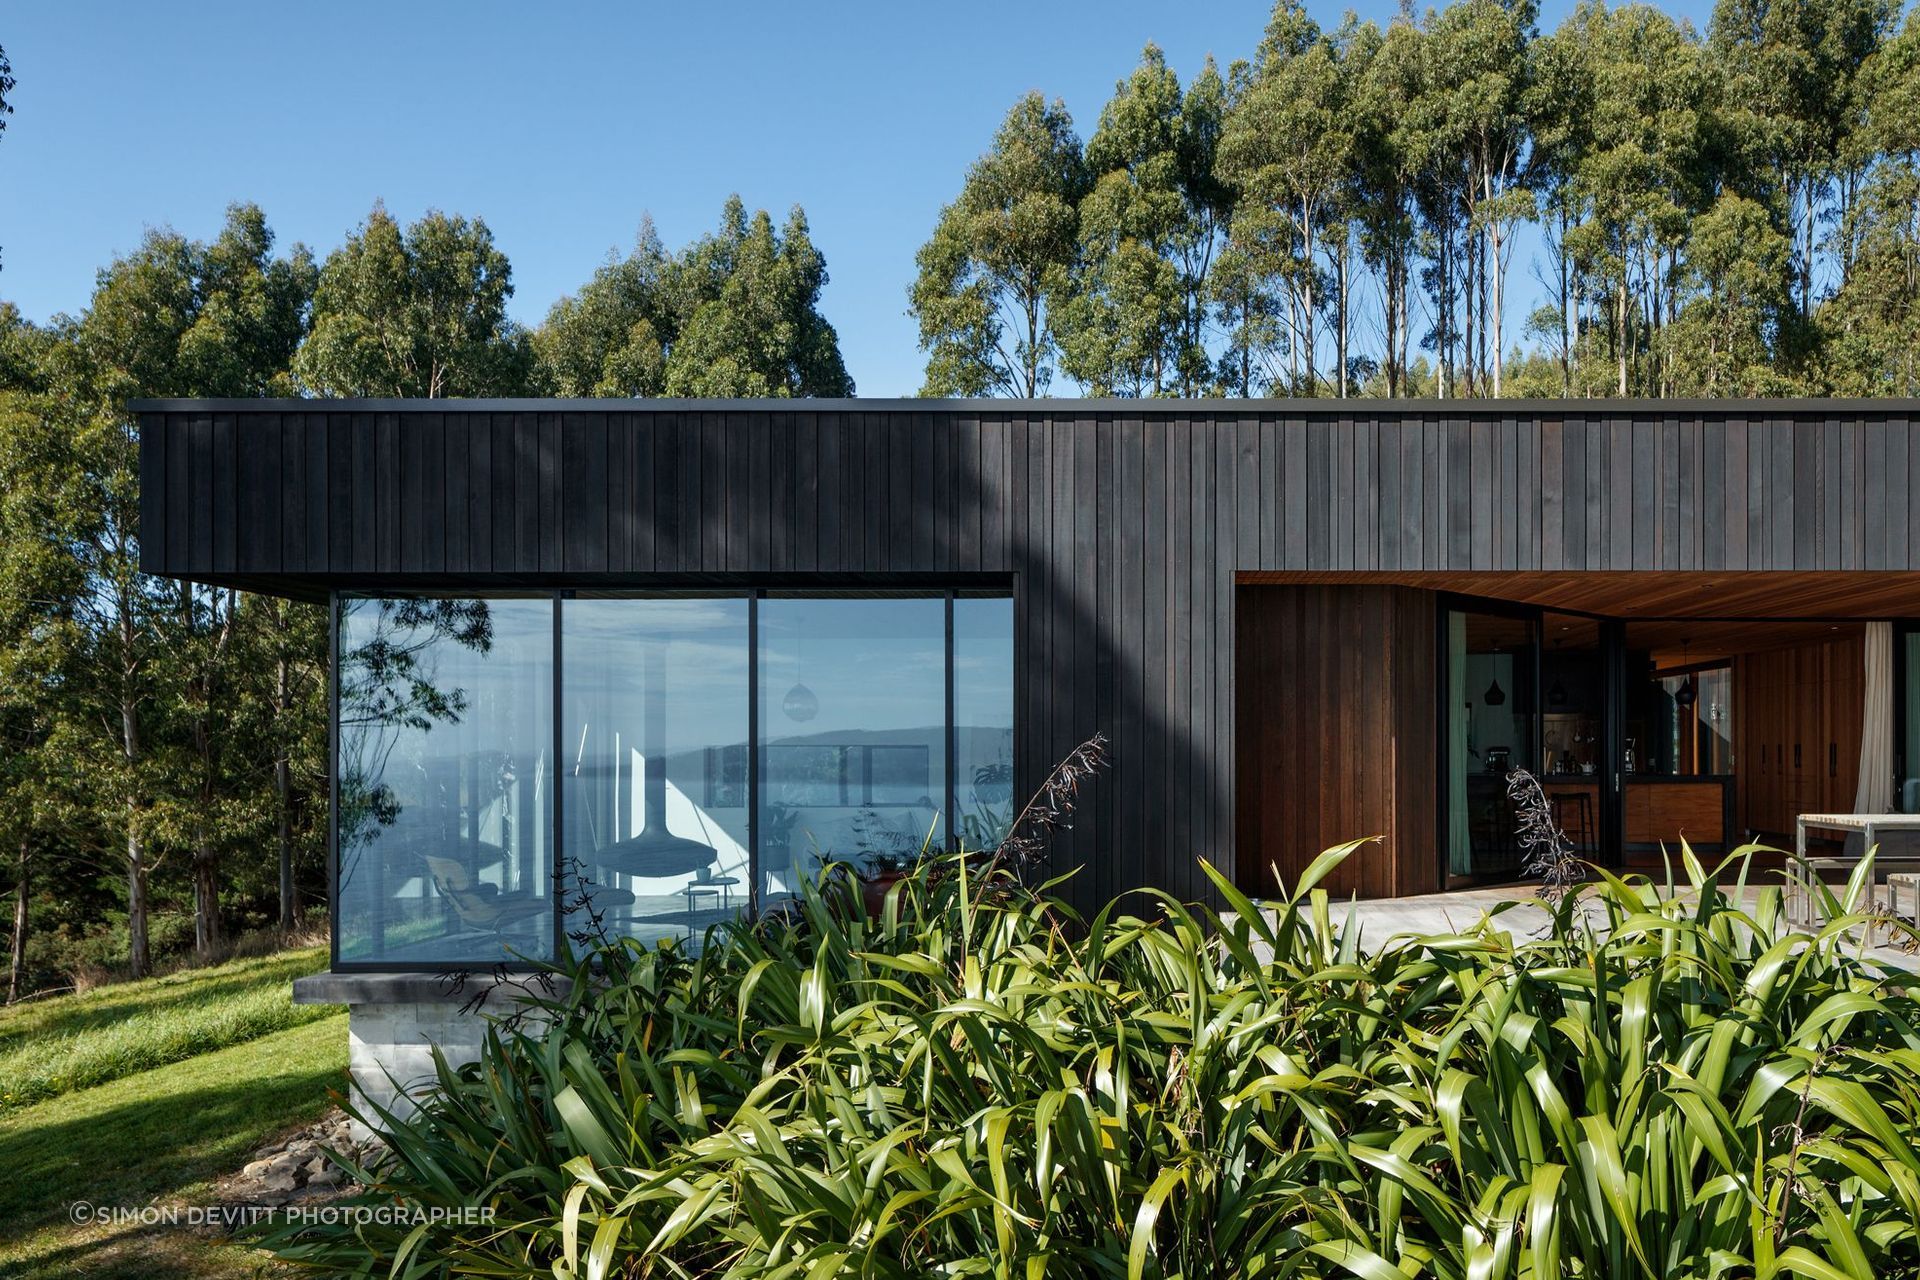 Black stained cedar cladding lines the exterior, laid with varying profiles relative to its location on the building.